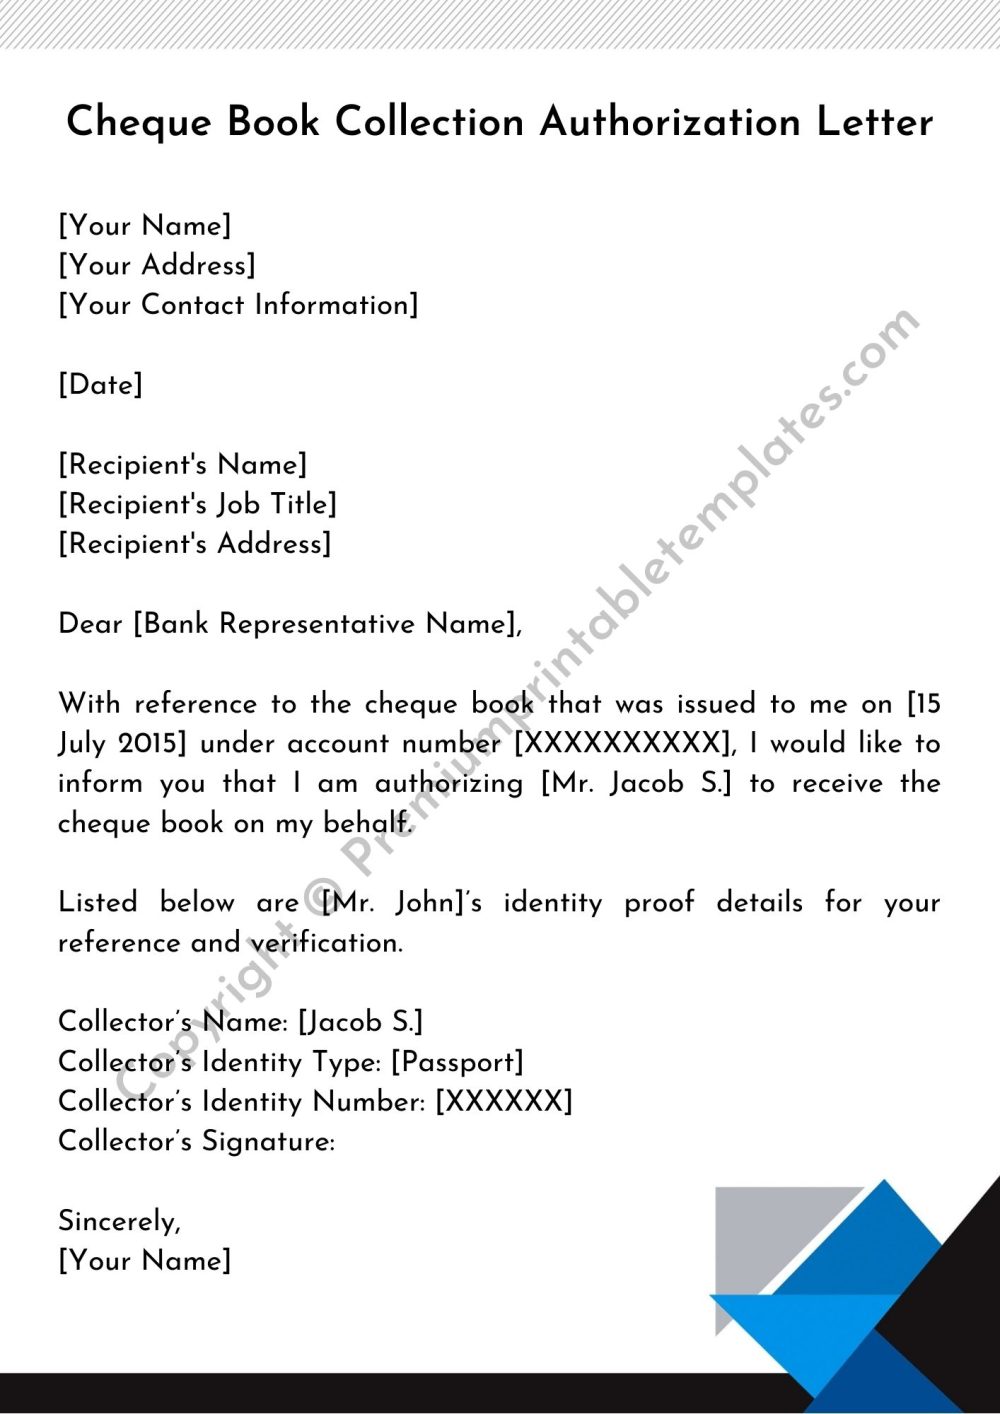 Cheque Book Collection Authorization Letter PDF